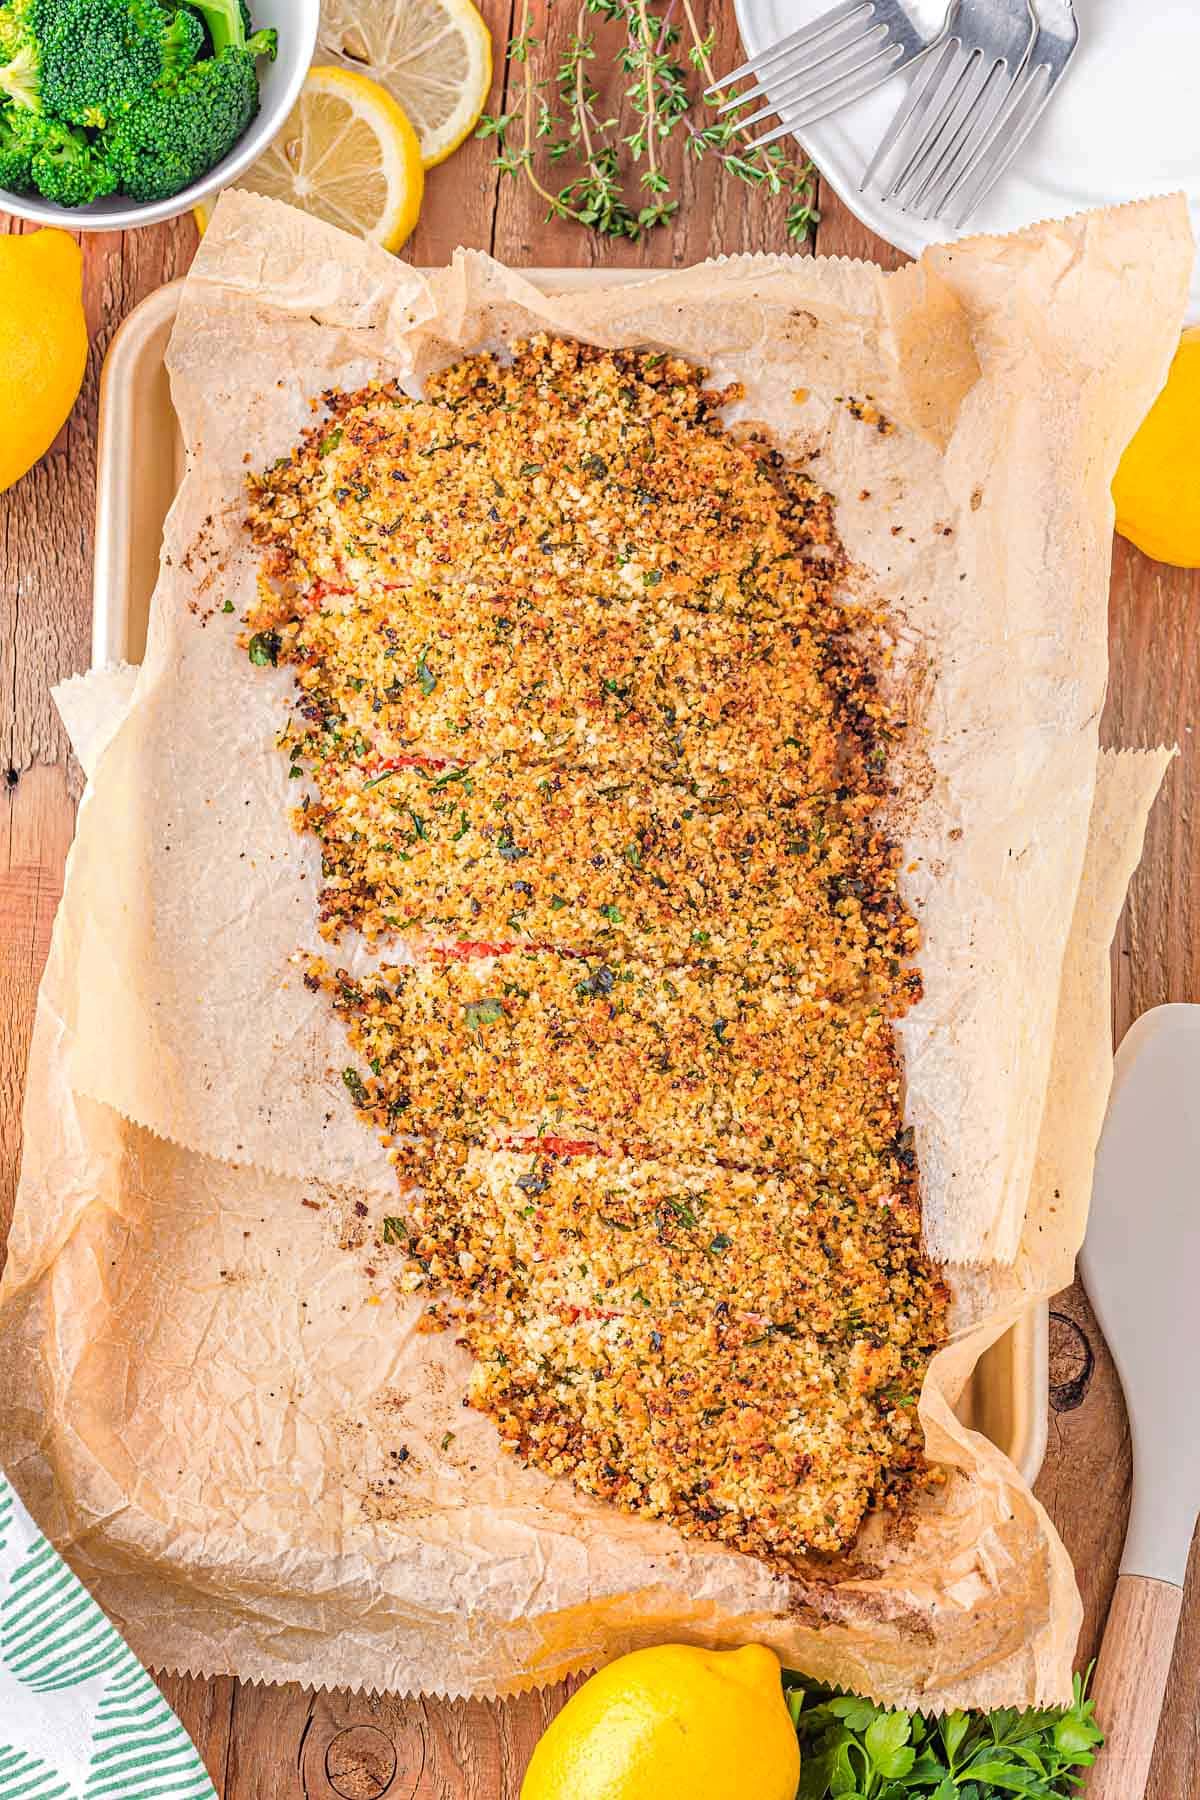 top down view of a bake salmon filet with a crust made with parmesan, panko and herbs. the filet is sitting on a parchment lined baking sheet.